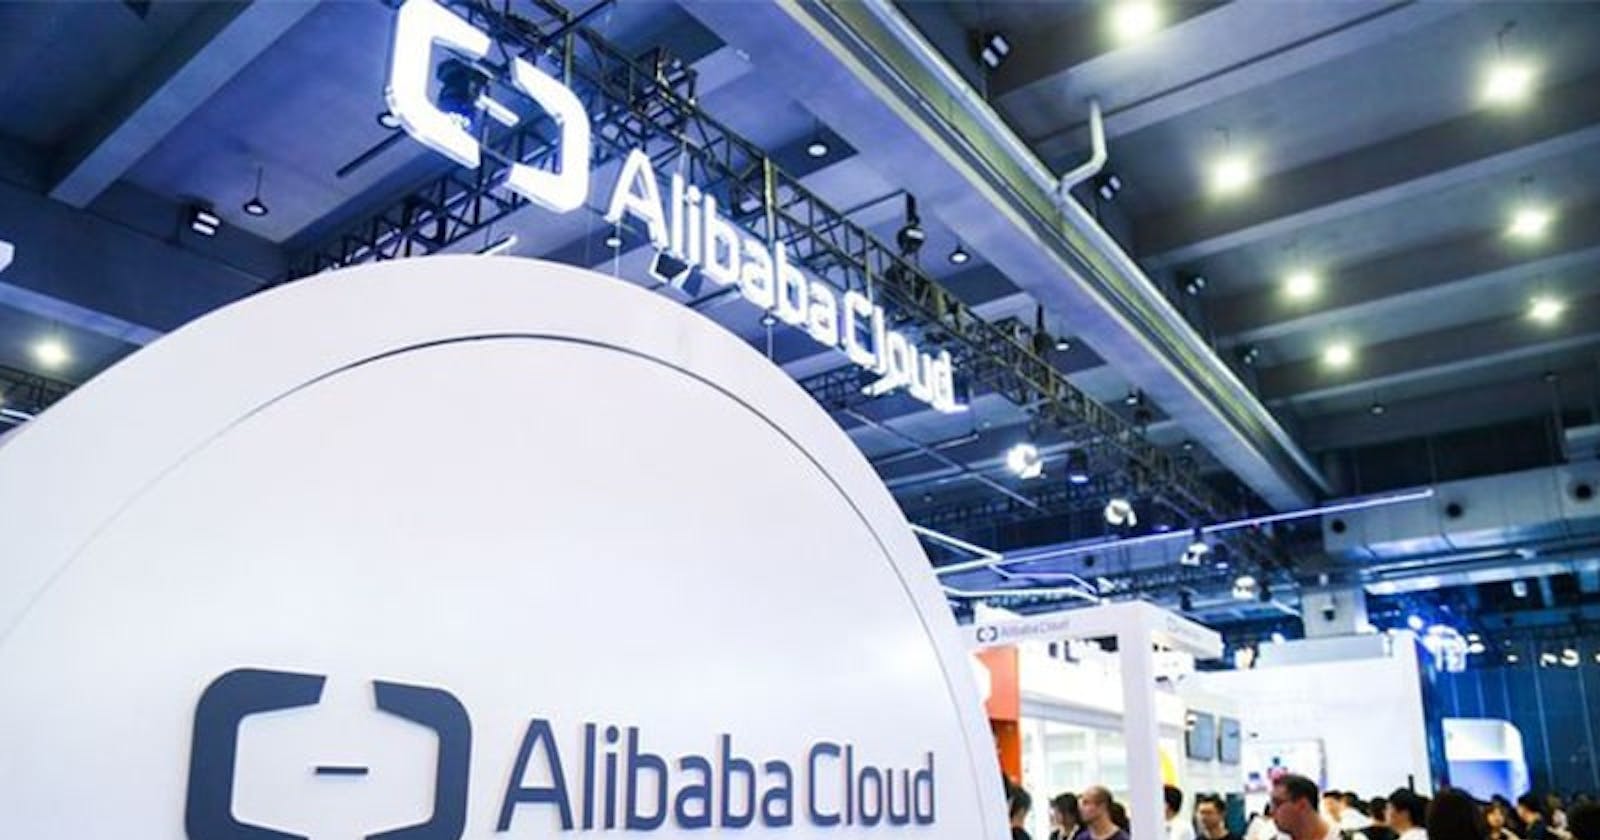 Alibaba Cloud: Companies Will Leverage the Cloud for AI and Blockchain in 2023